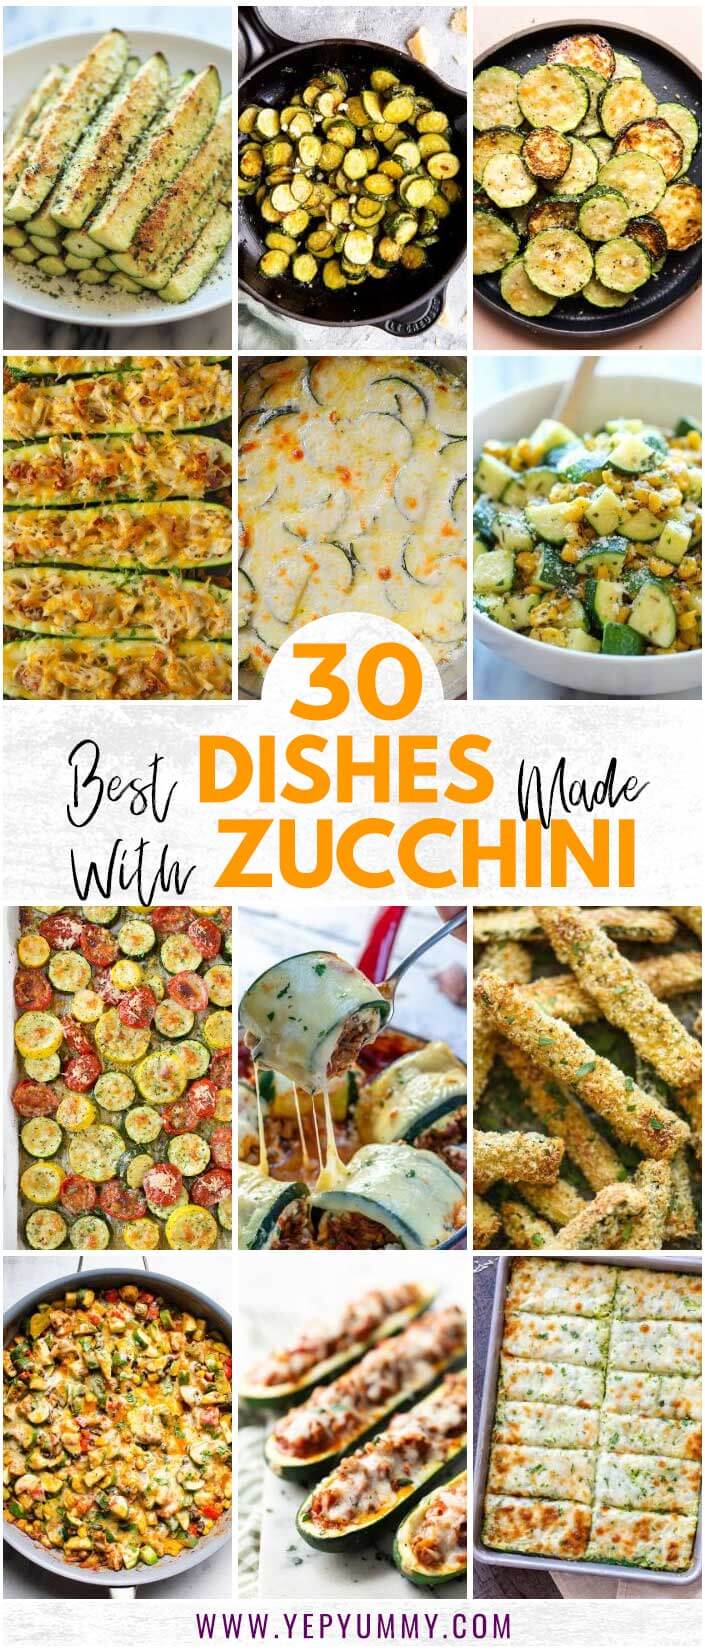 Here Are 30 Best Dishes Made with Zucchini